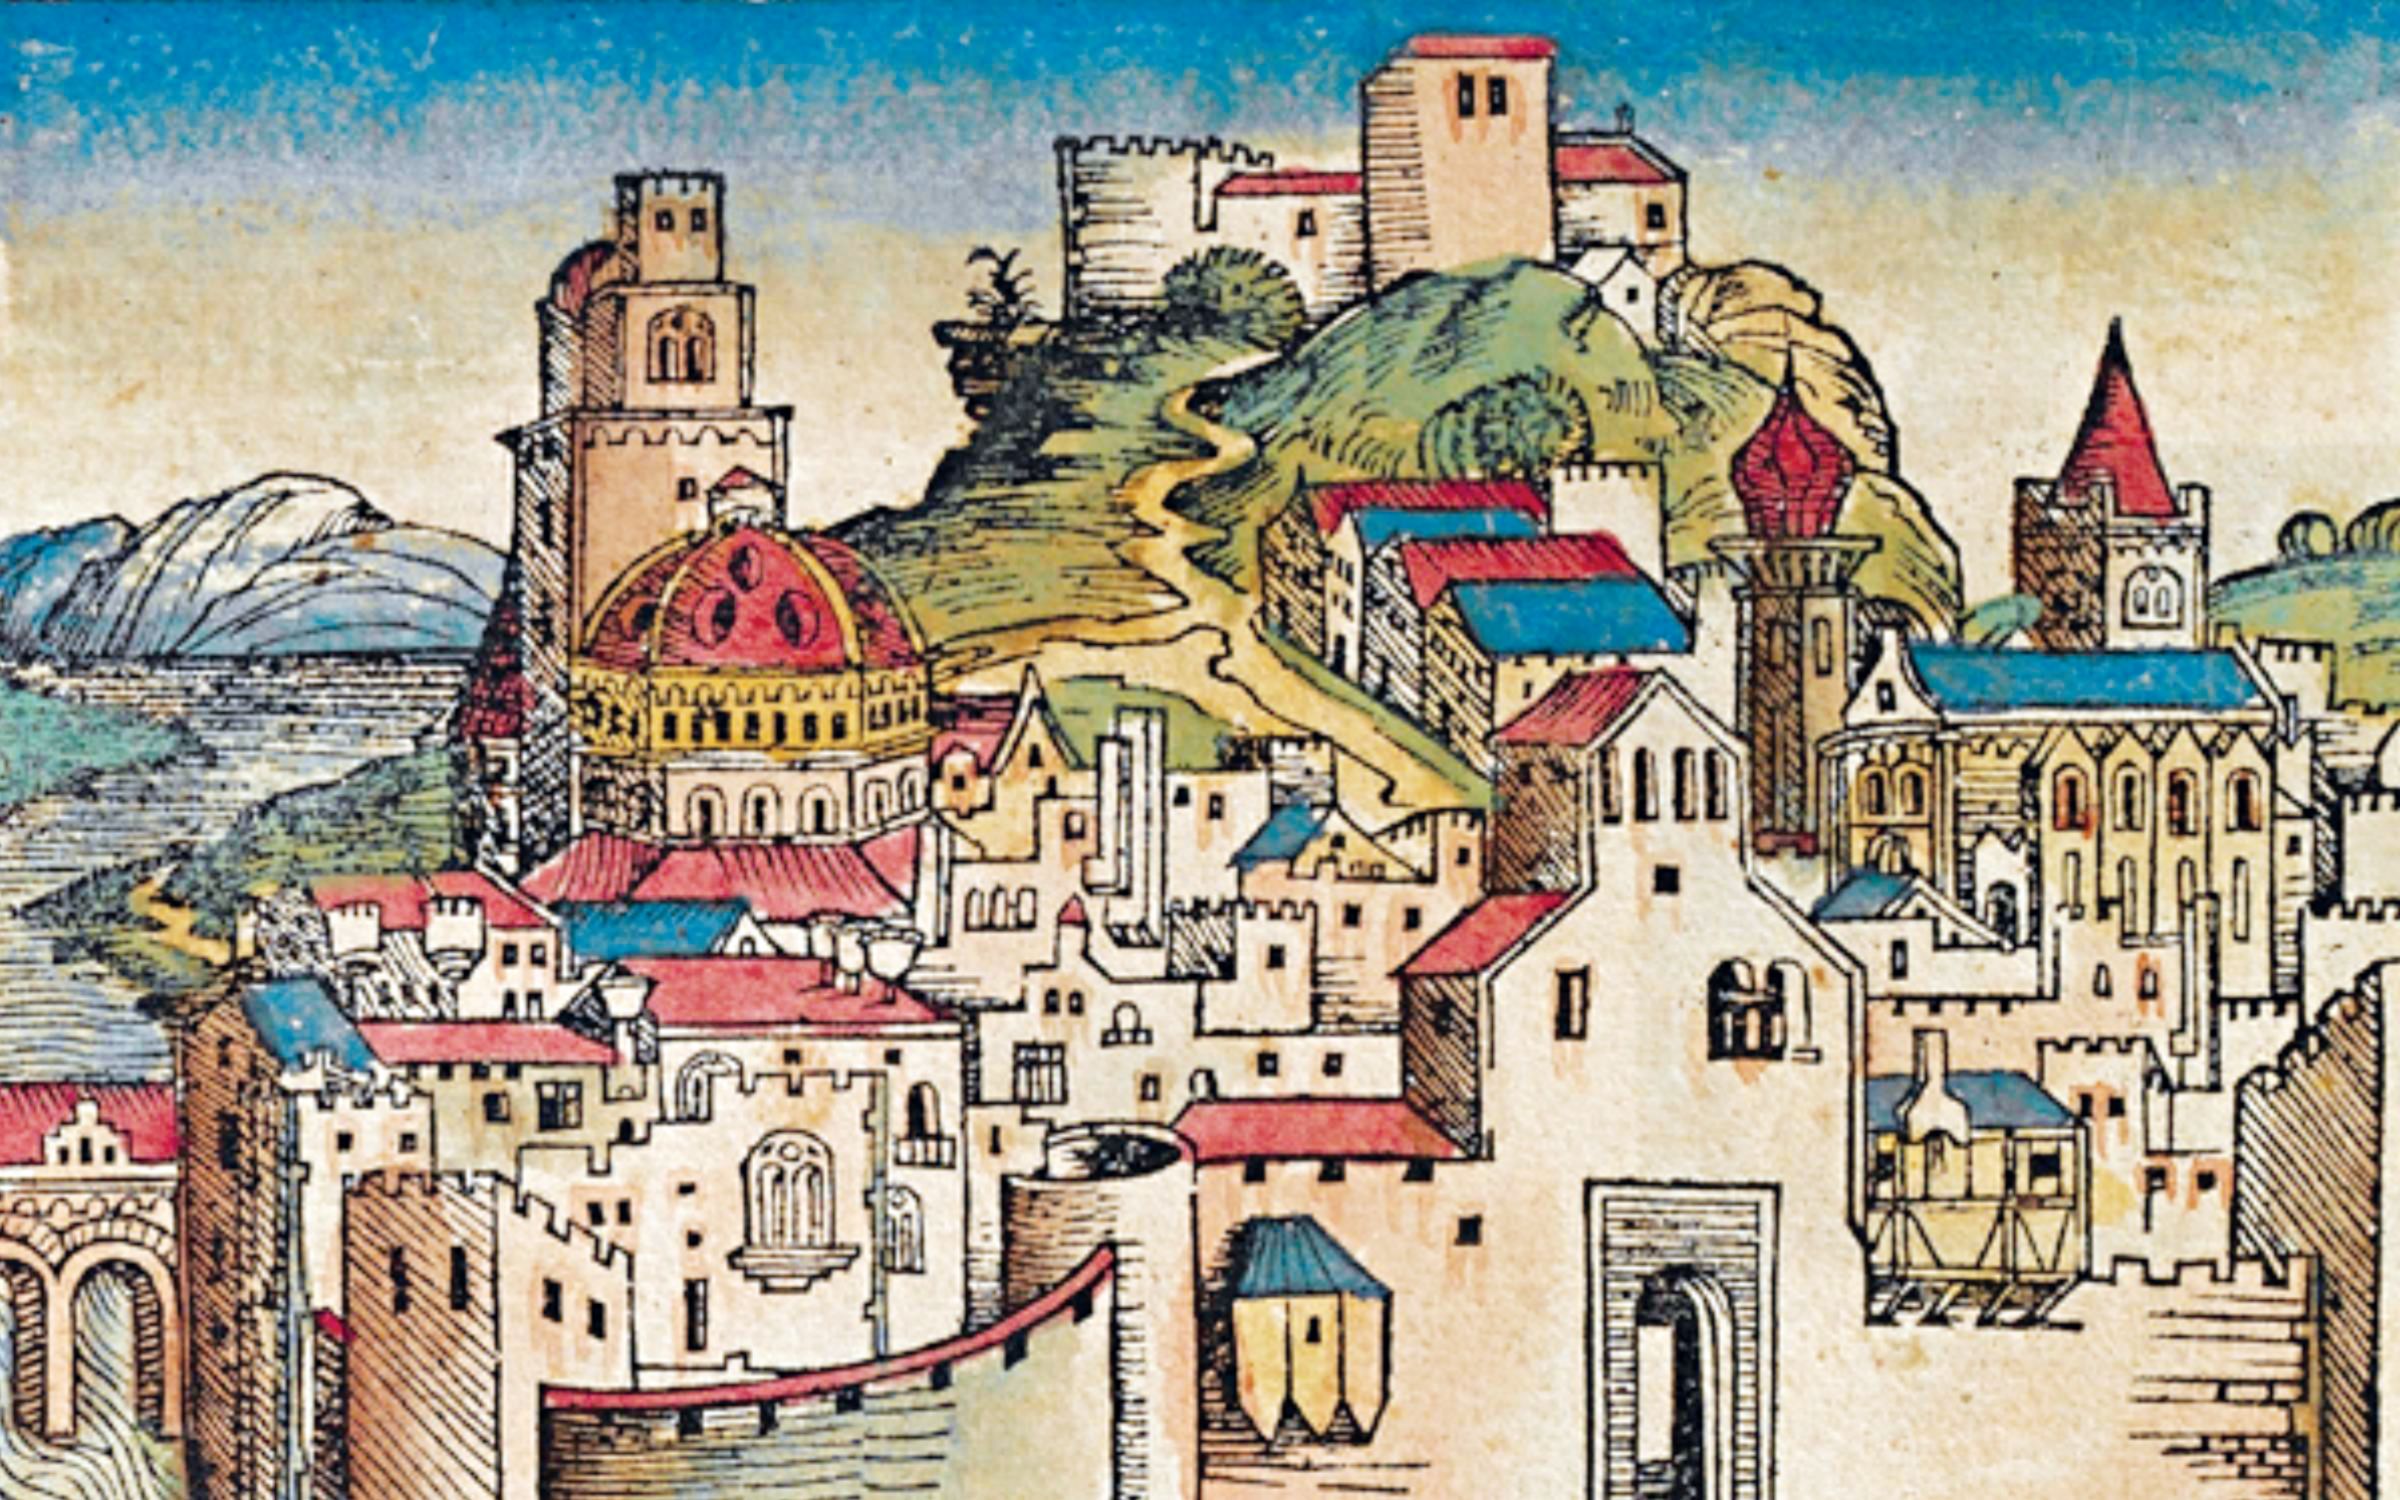 An idealized woodcut Illustration of the city of Carthage from the 1493 “Nuremberg Chronicle” (Liber Chronicarum) by Michael Wolgemut (German, 1434–1519).